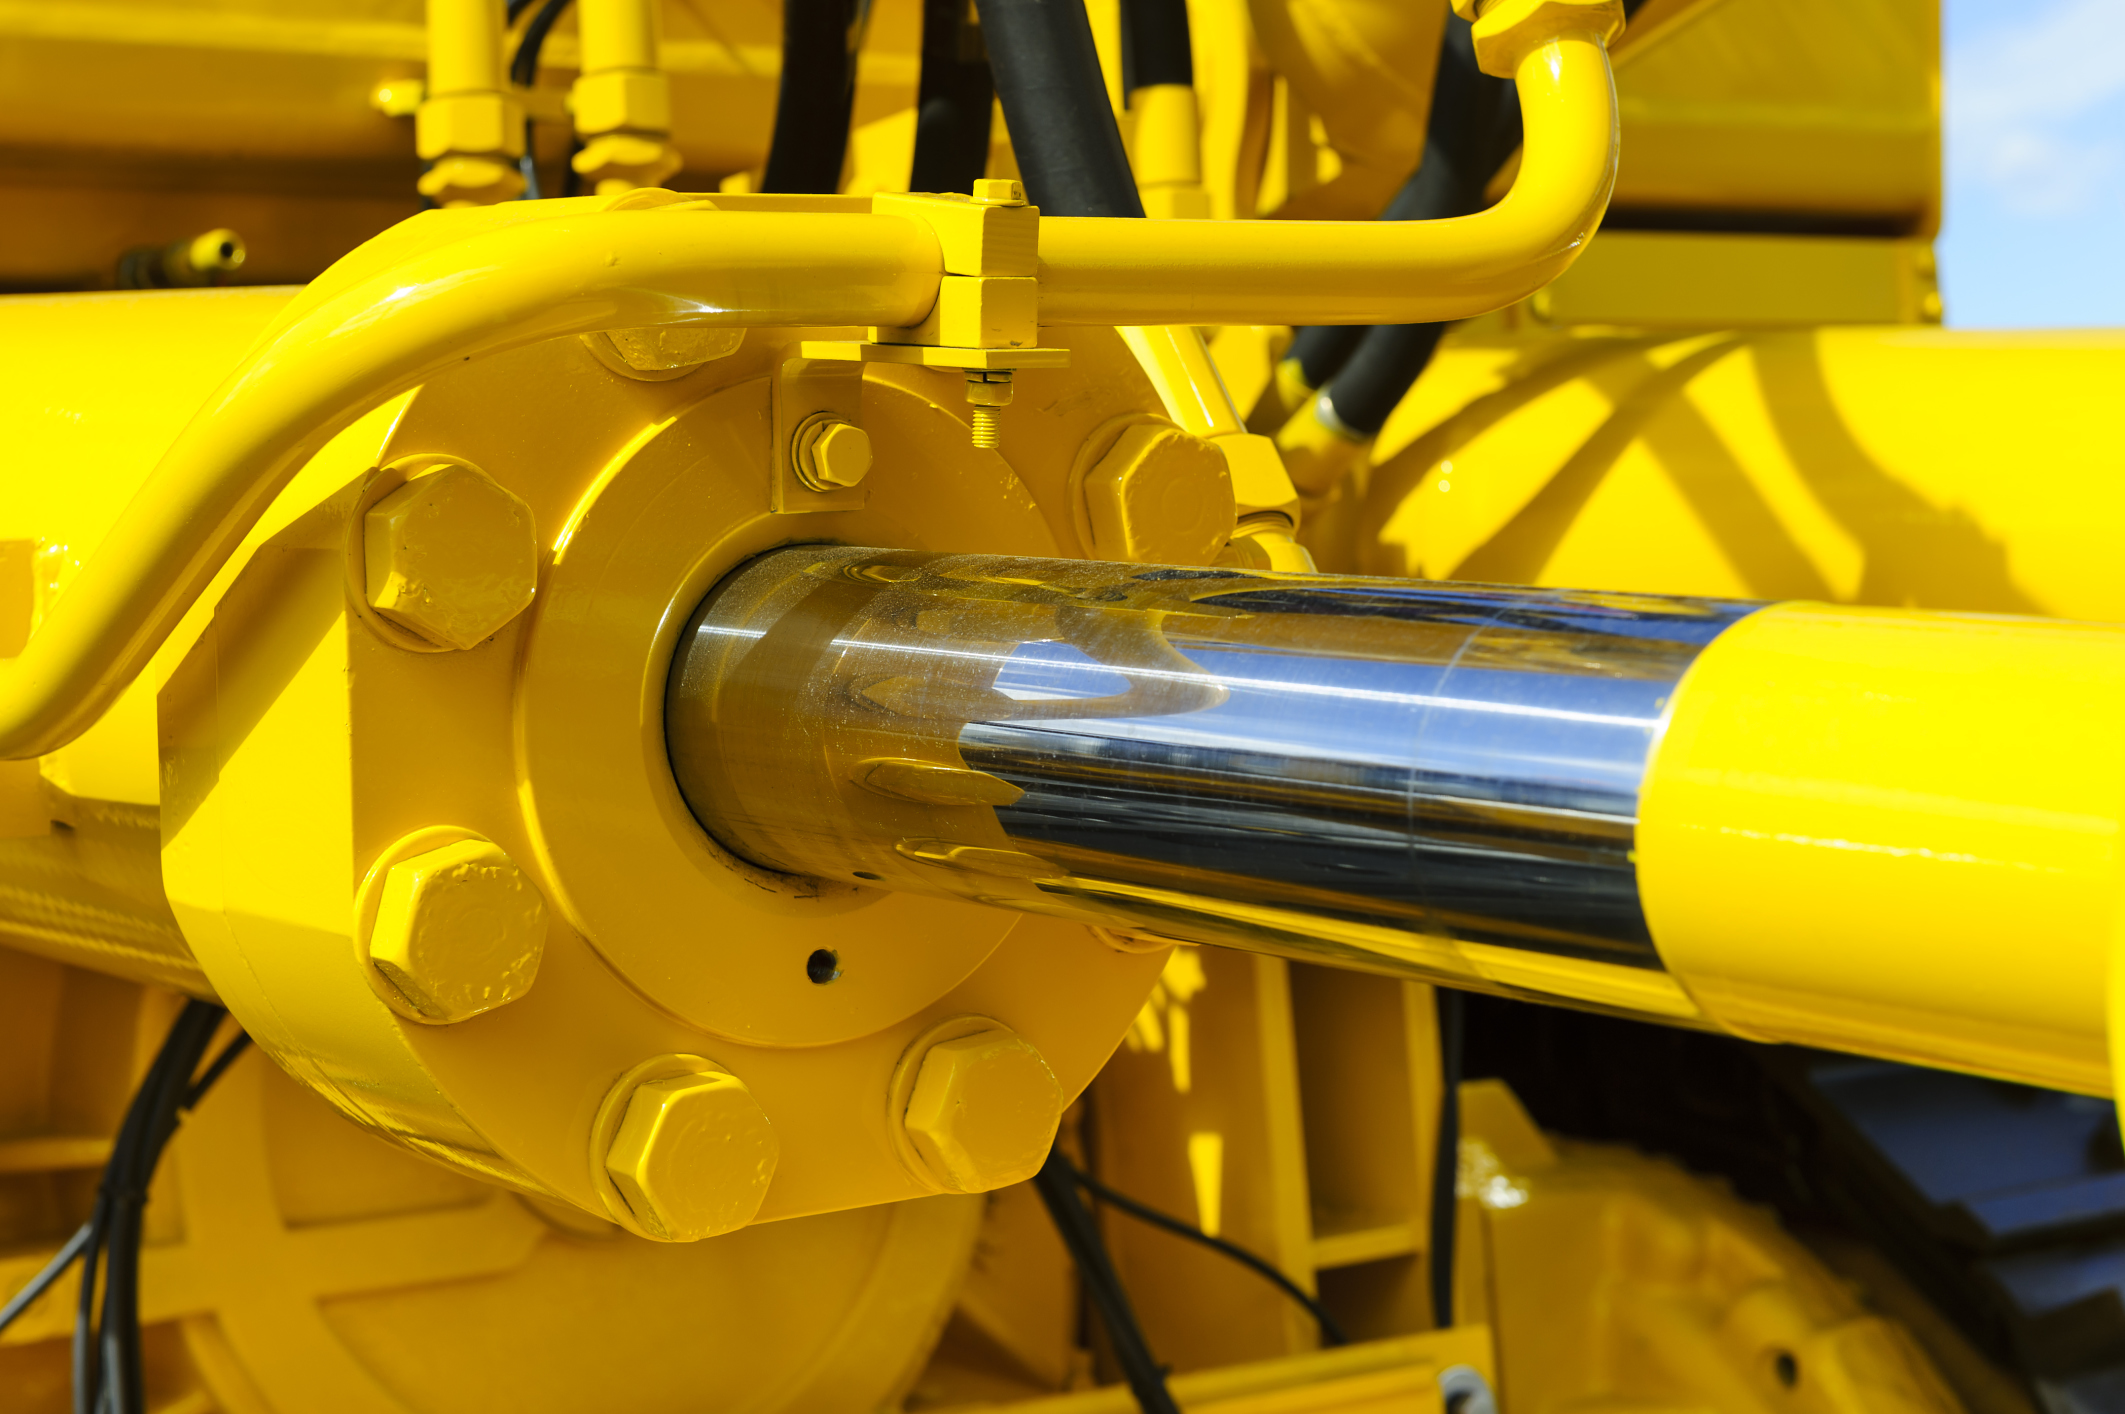 How Can Hydraulic Systems Work?